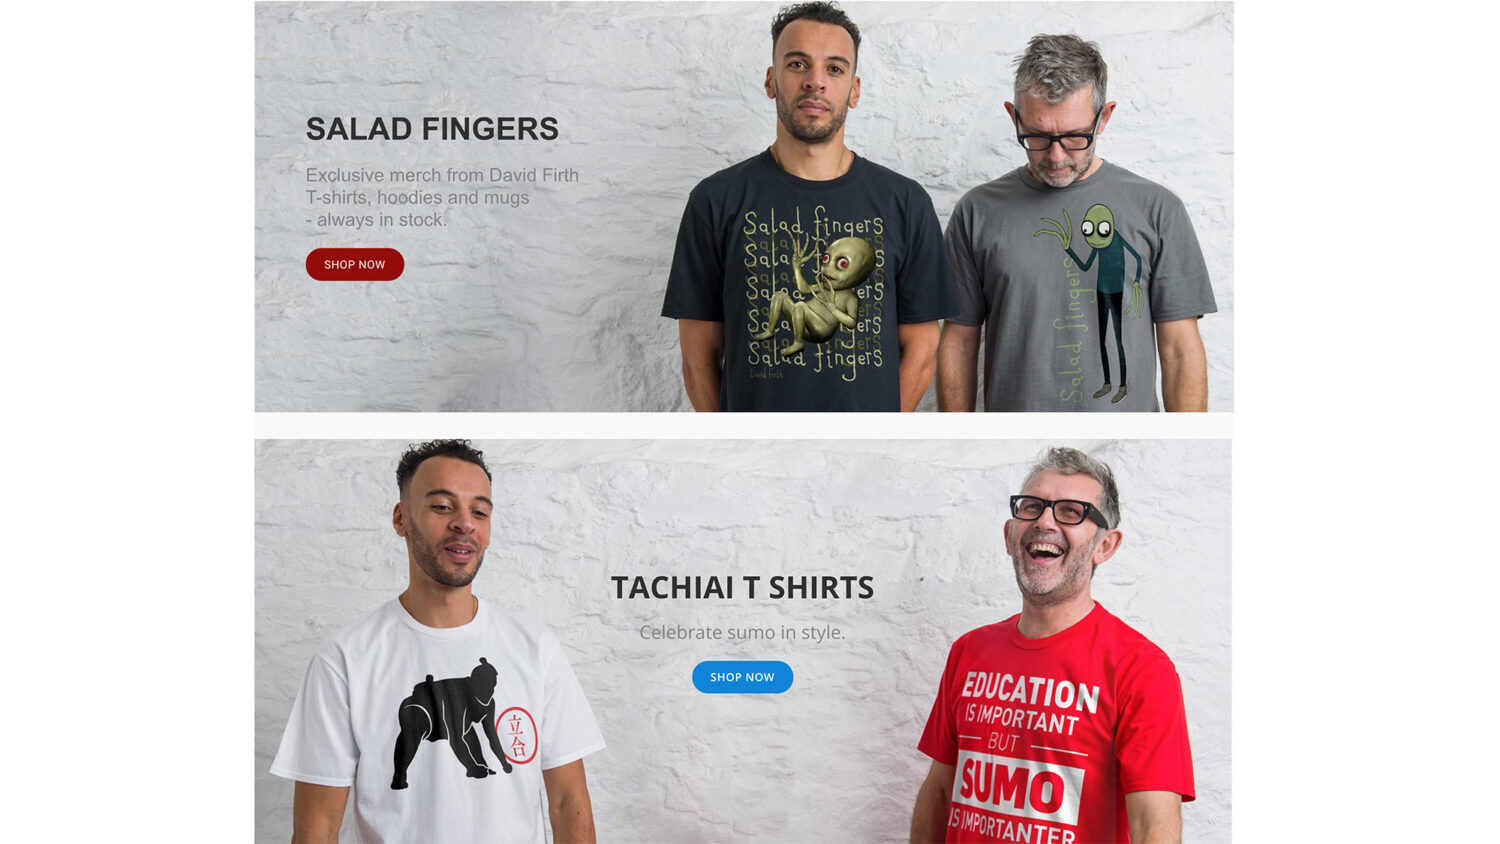 E-commerce photography for websites by Colin Hawkins